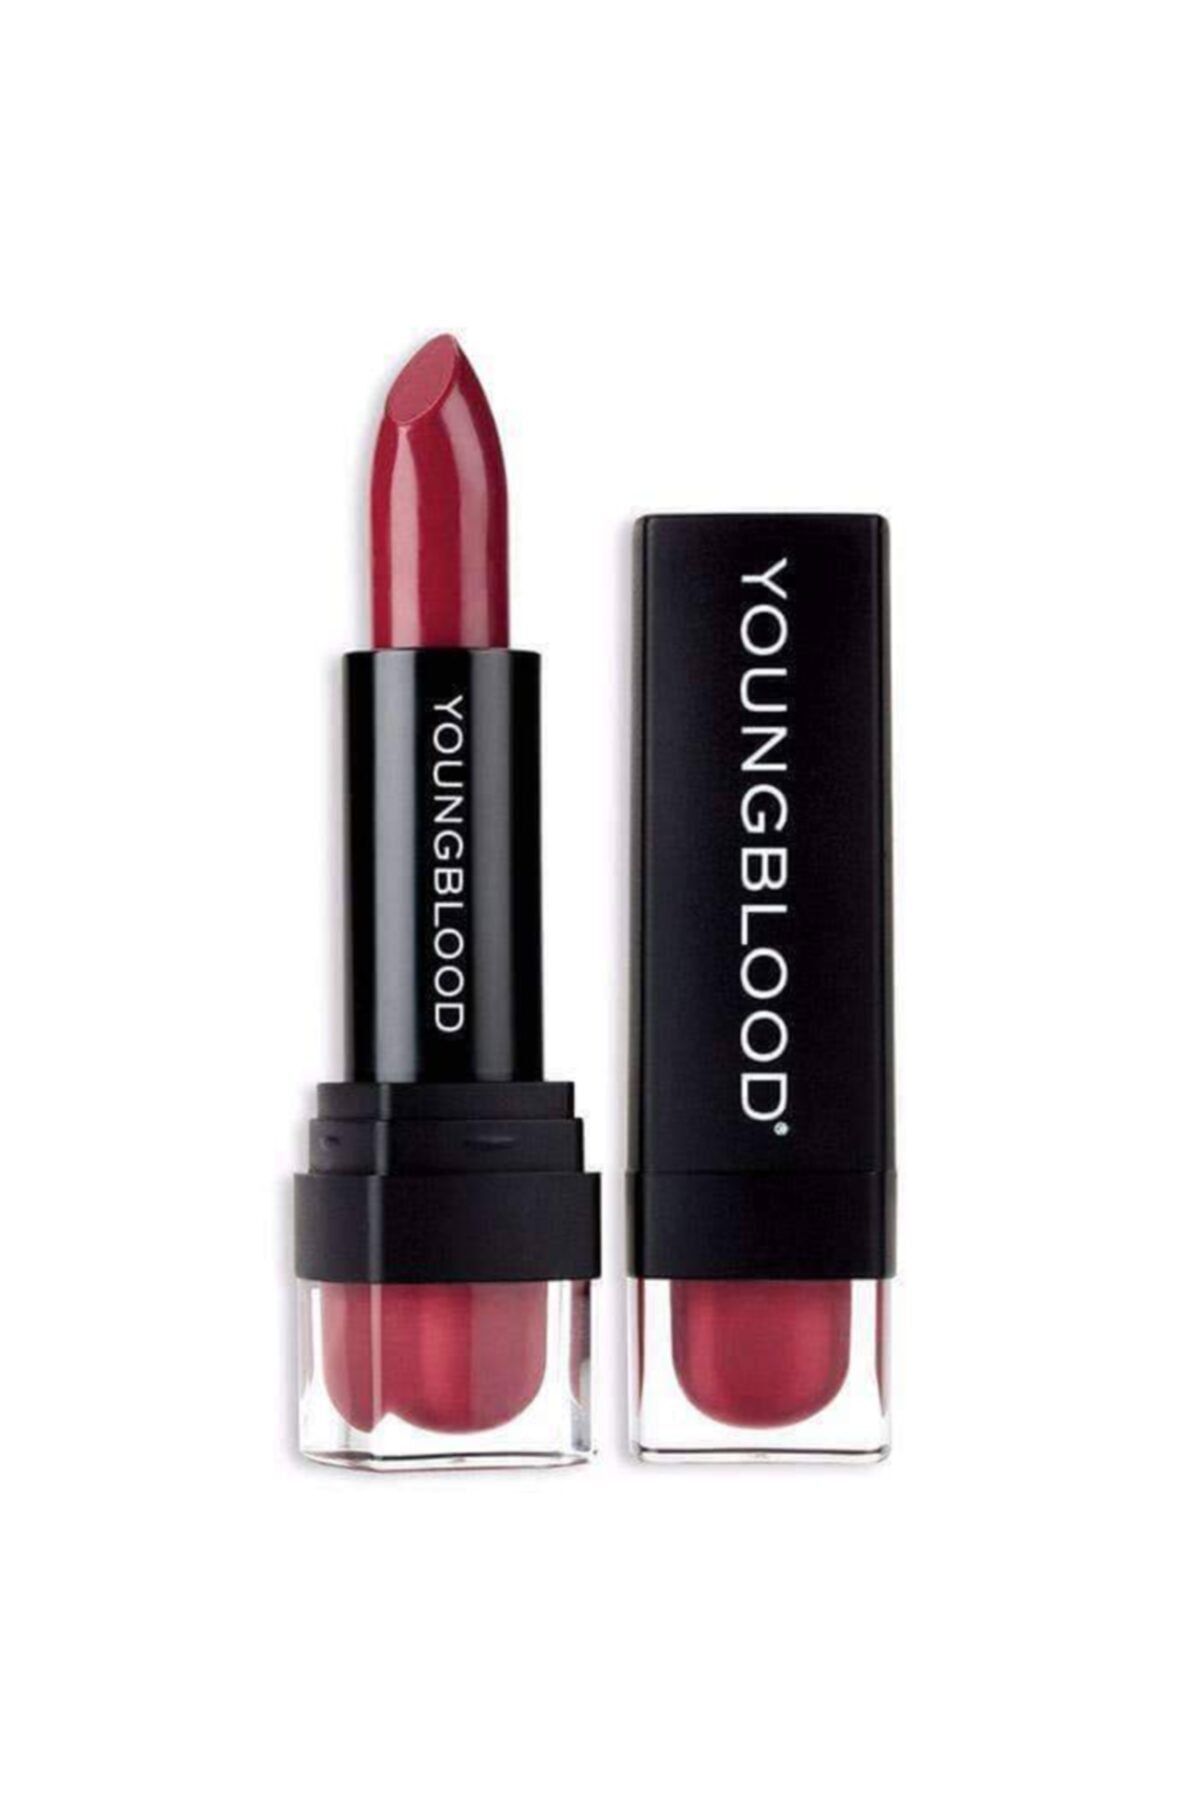 Youngblood Youngblood Mineral Creme Lipstick Mineral Ruj 4 Gr. (kranberry. Koyu Pembe)